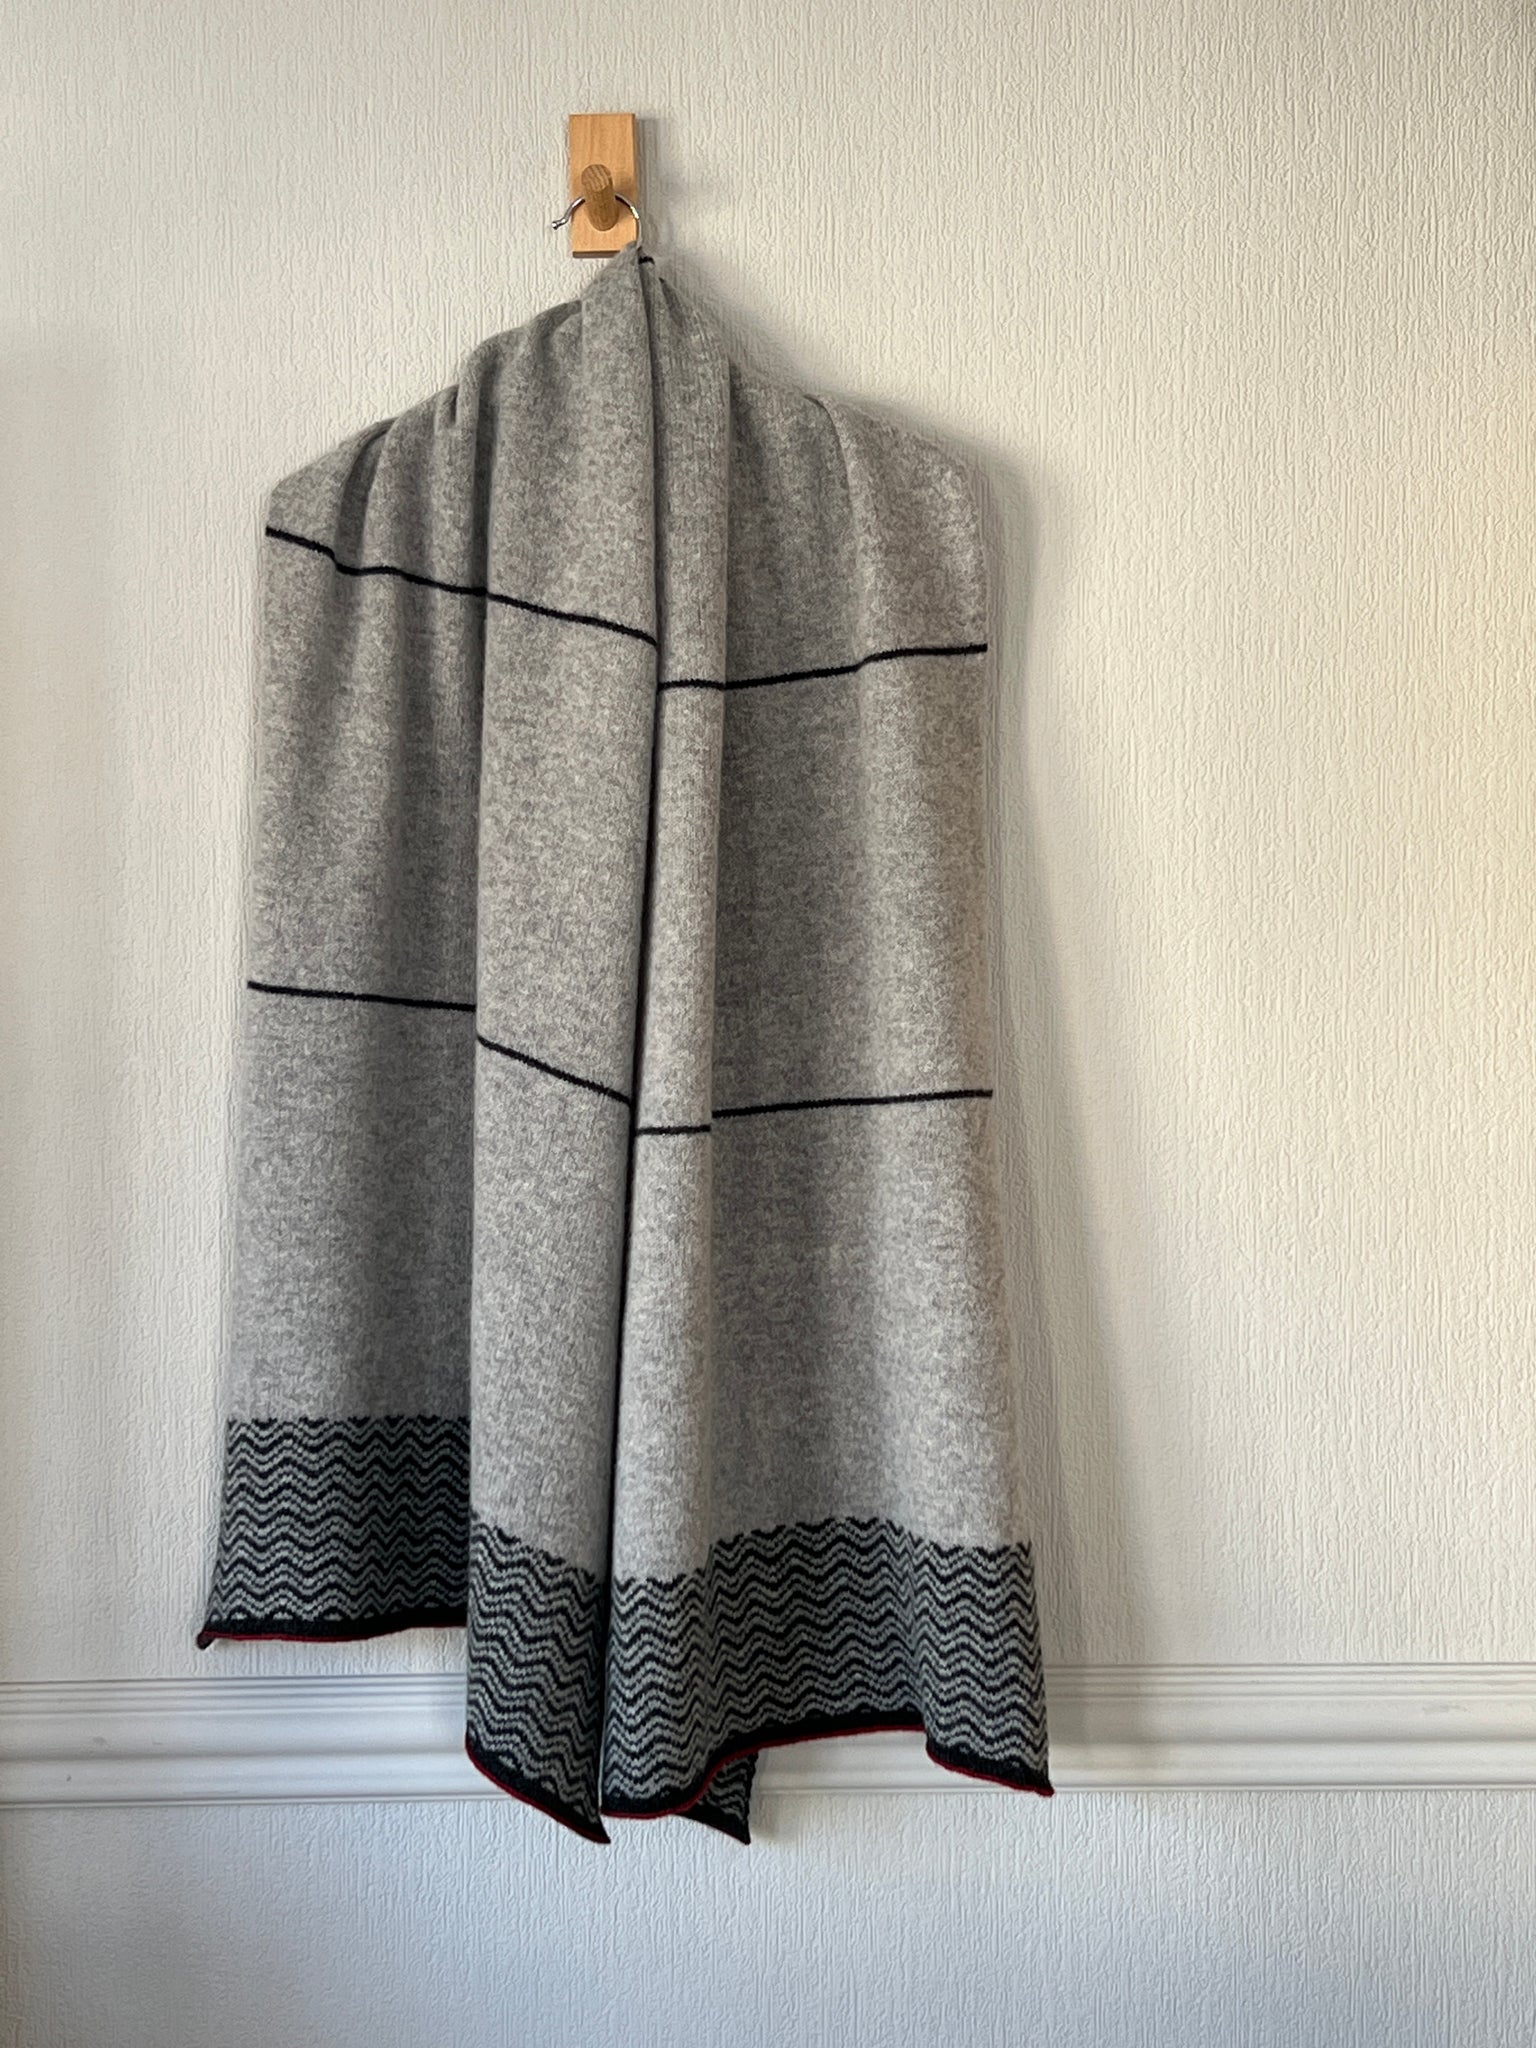 Scarf Wrap Shawl silver grey and nearly black patten and stripes